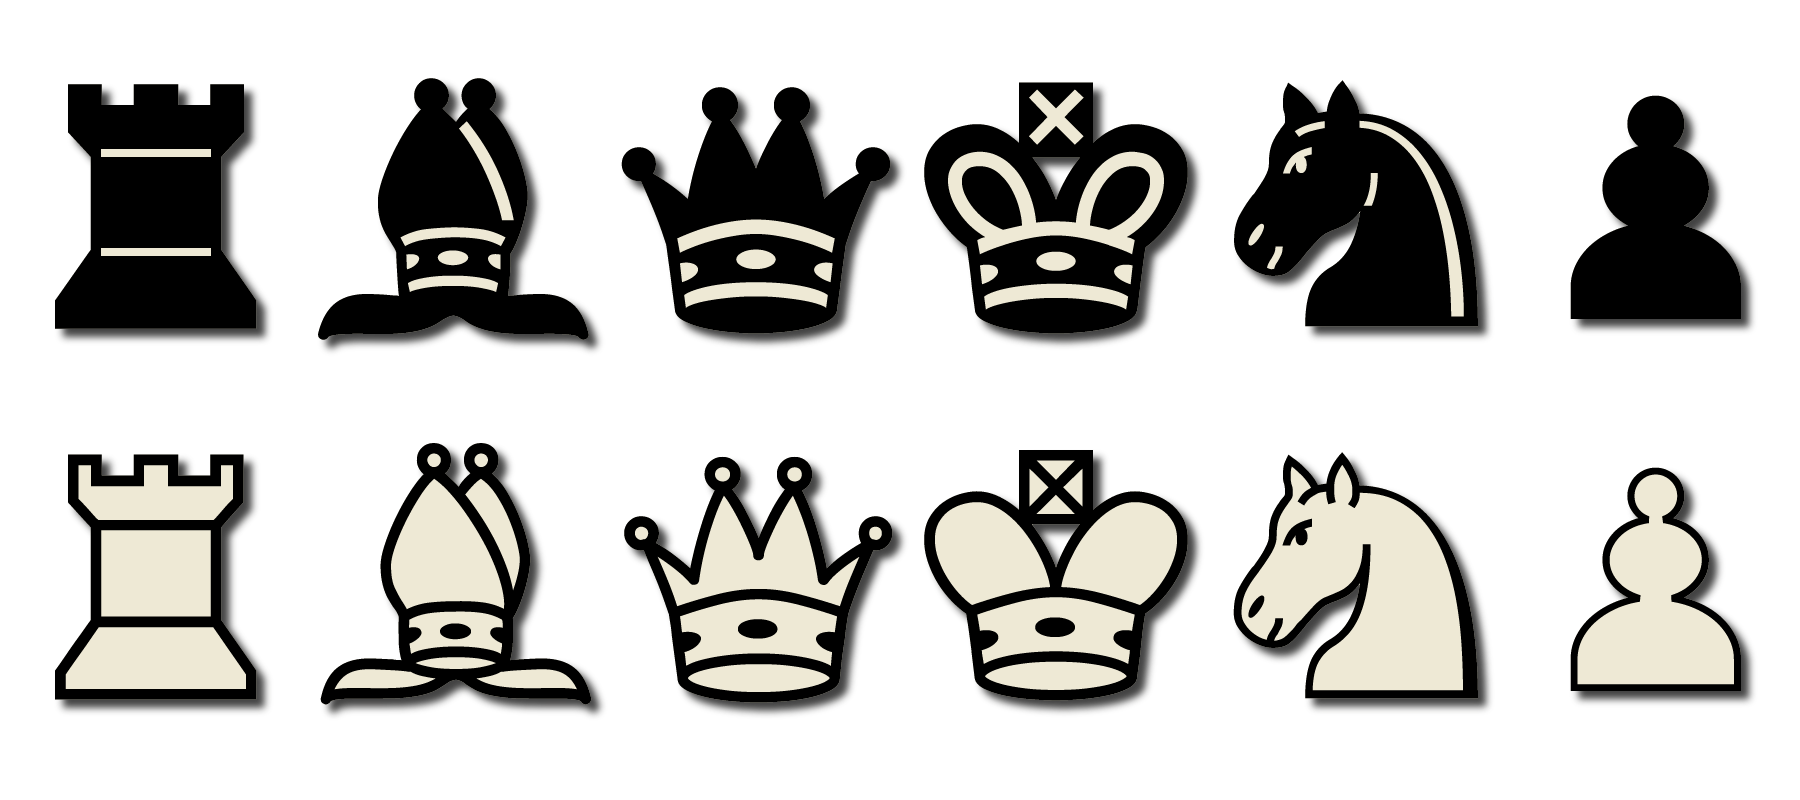 knights clipart clipart chess